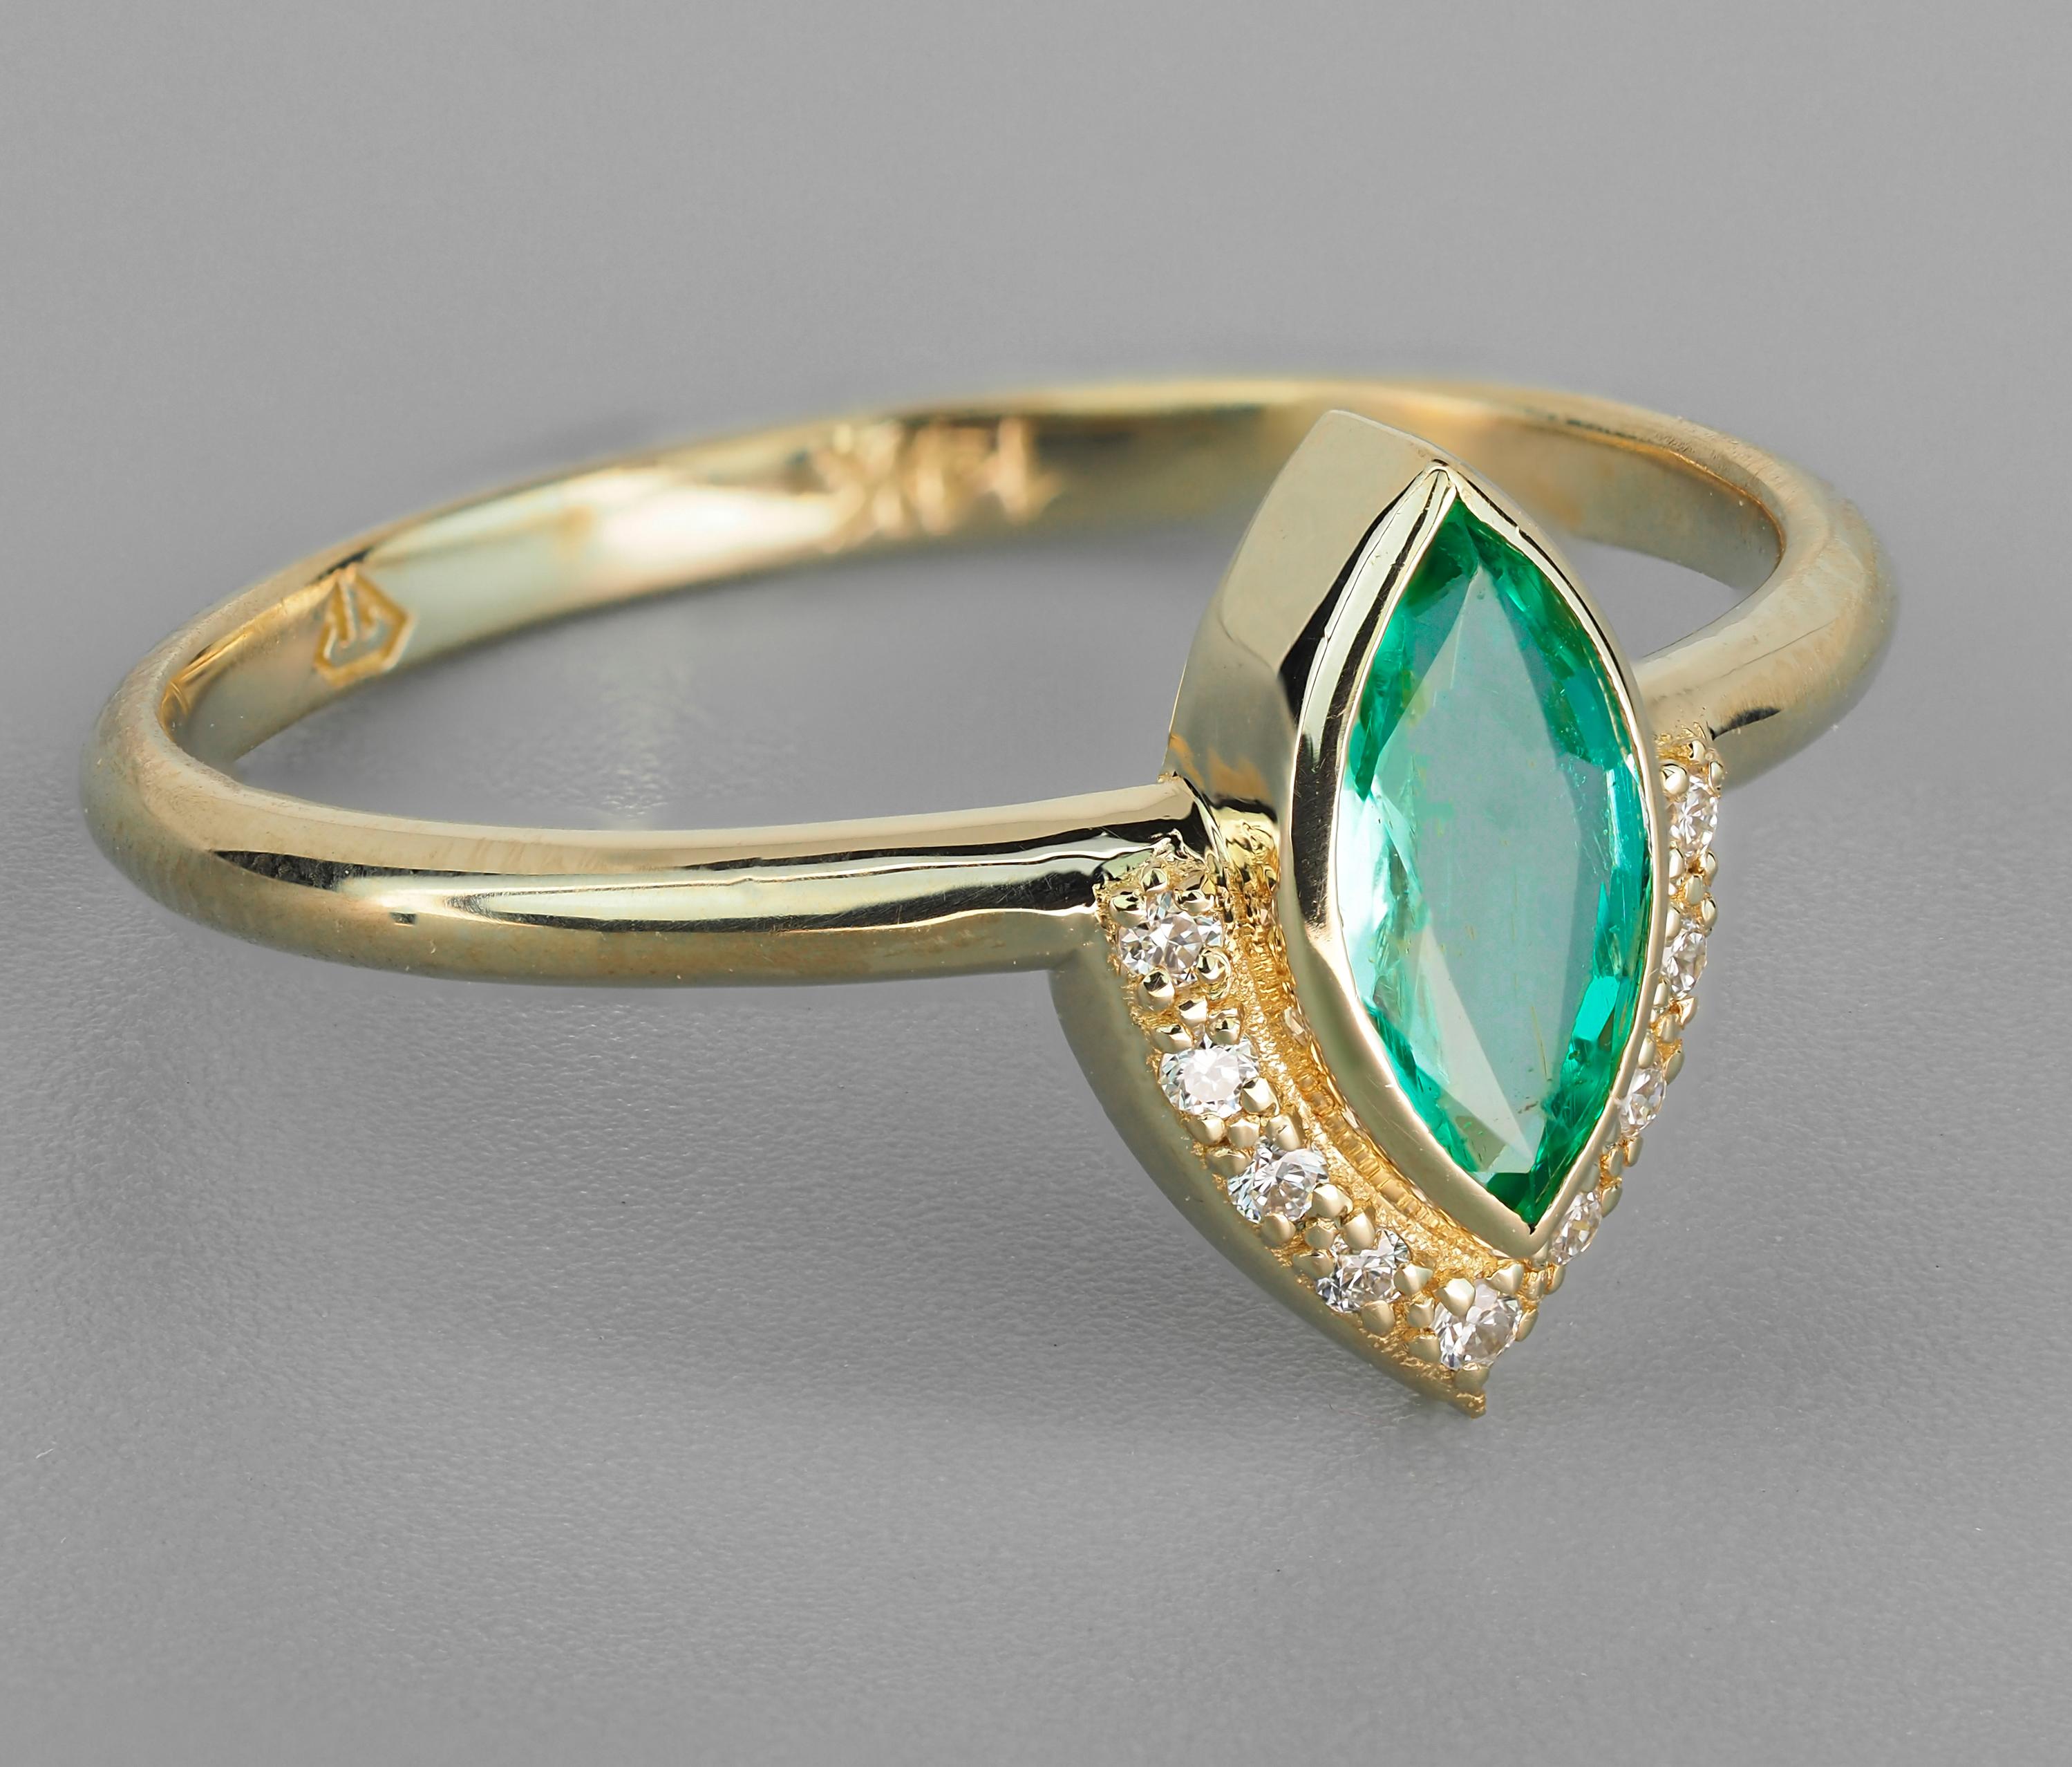 Marquise Cut Marquise Emerald Ring in 14 Karat Yellow Gold, Genuine Emerald Ring